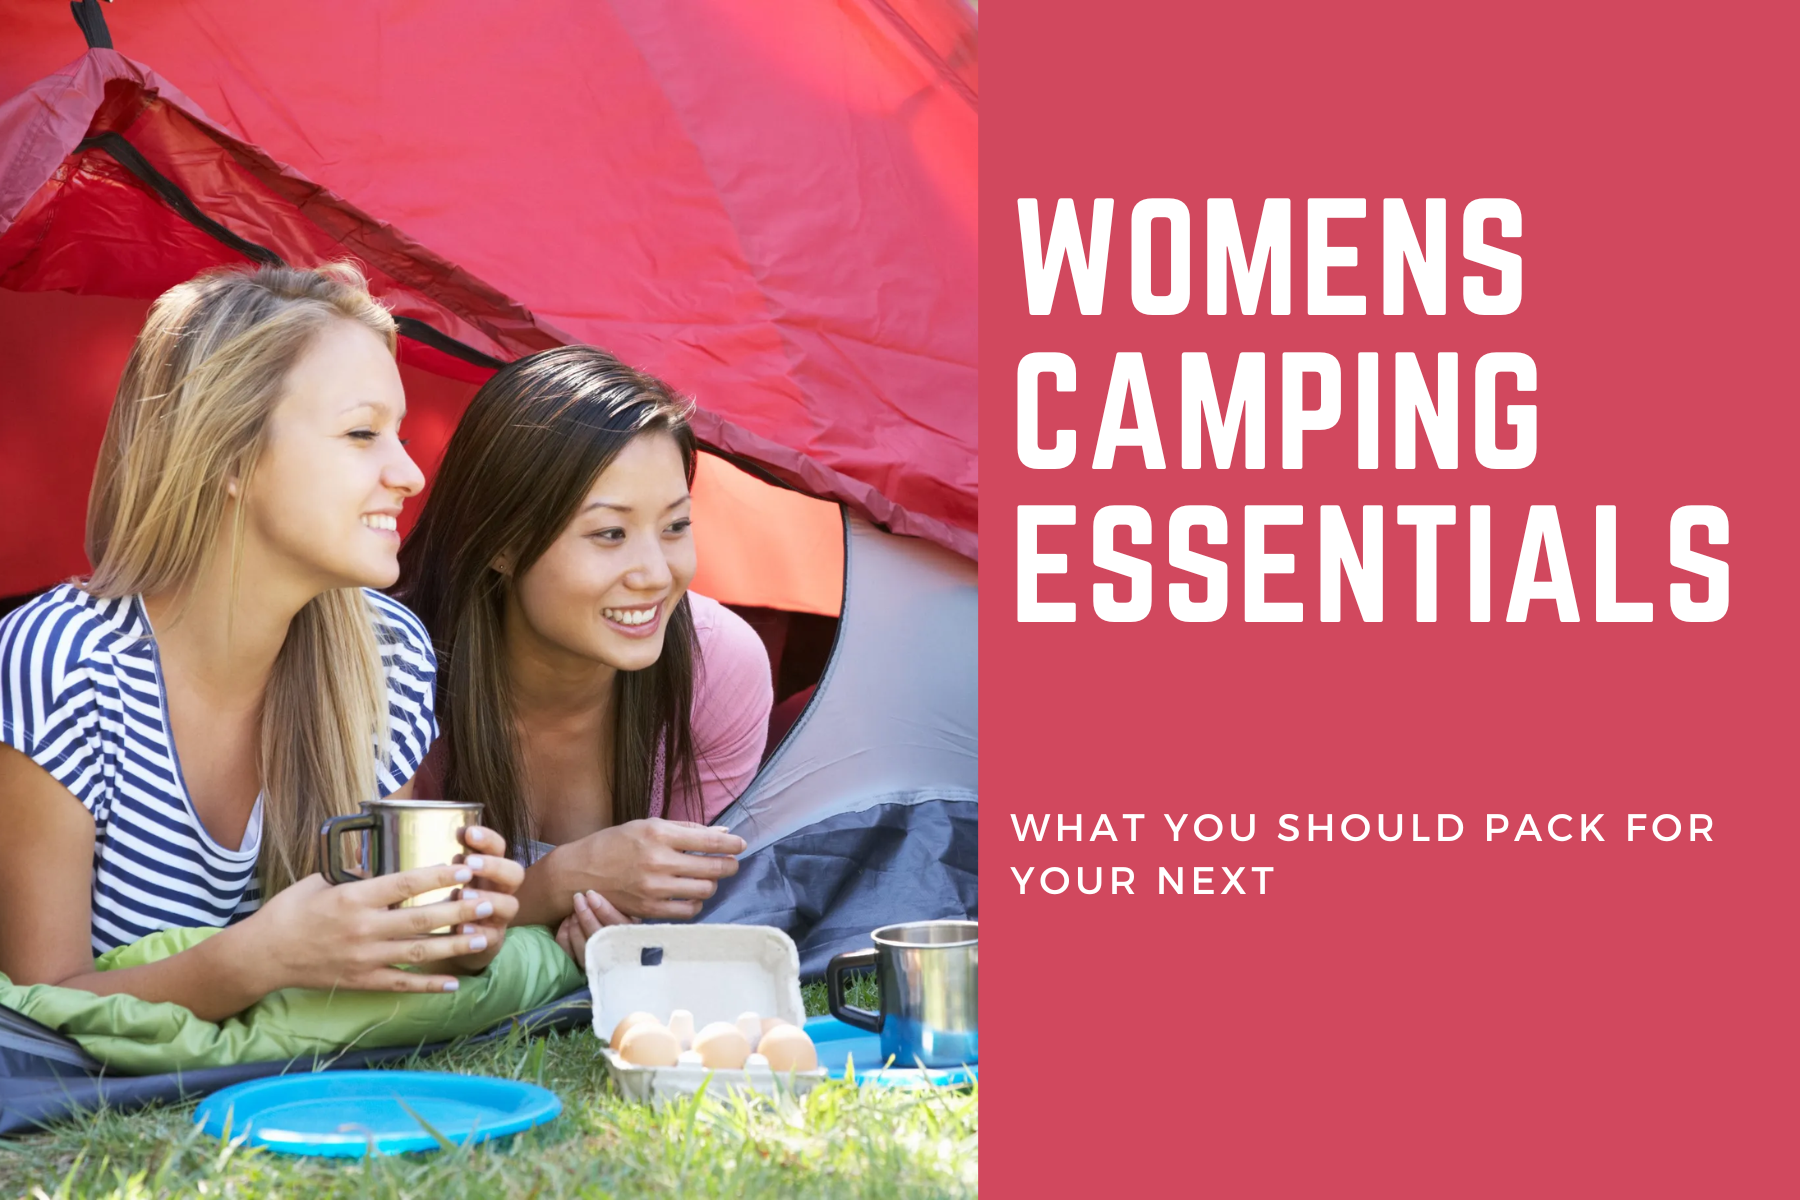 Womens Camping Essentials - What You Should Pack For Your Next Camping Trip